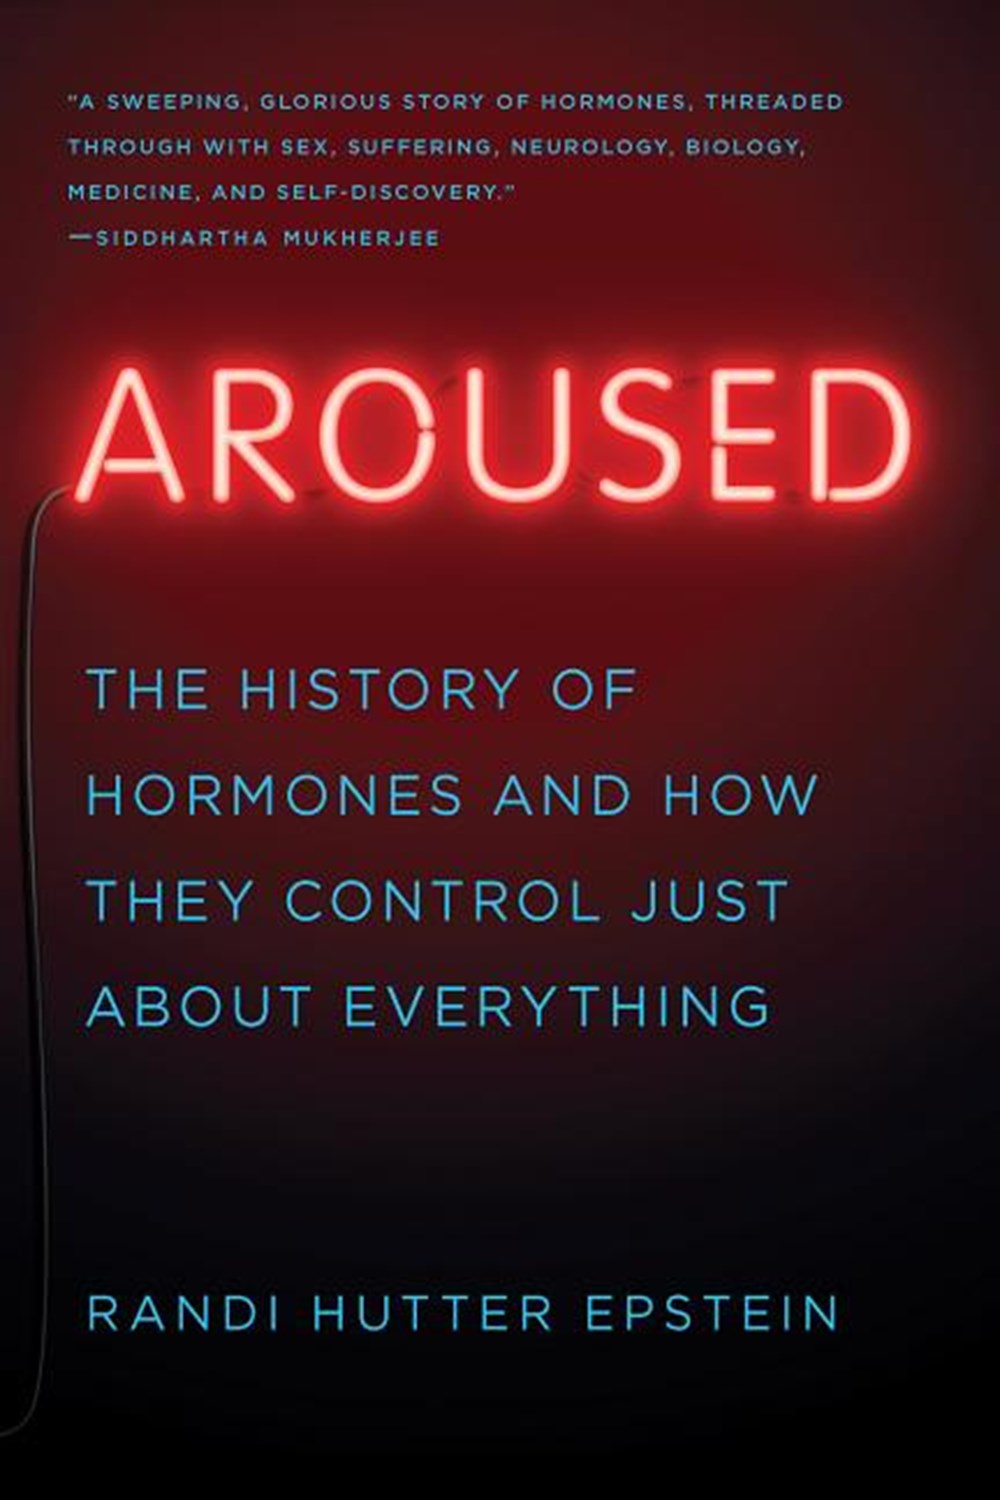 Aroused: The History of Hormones and How They Control Just about Everything